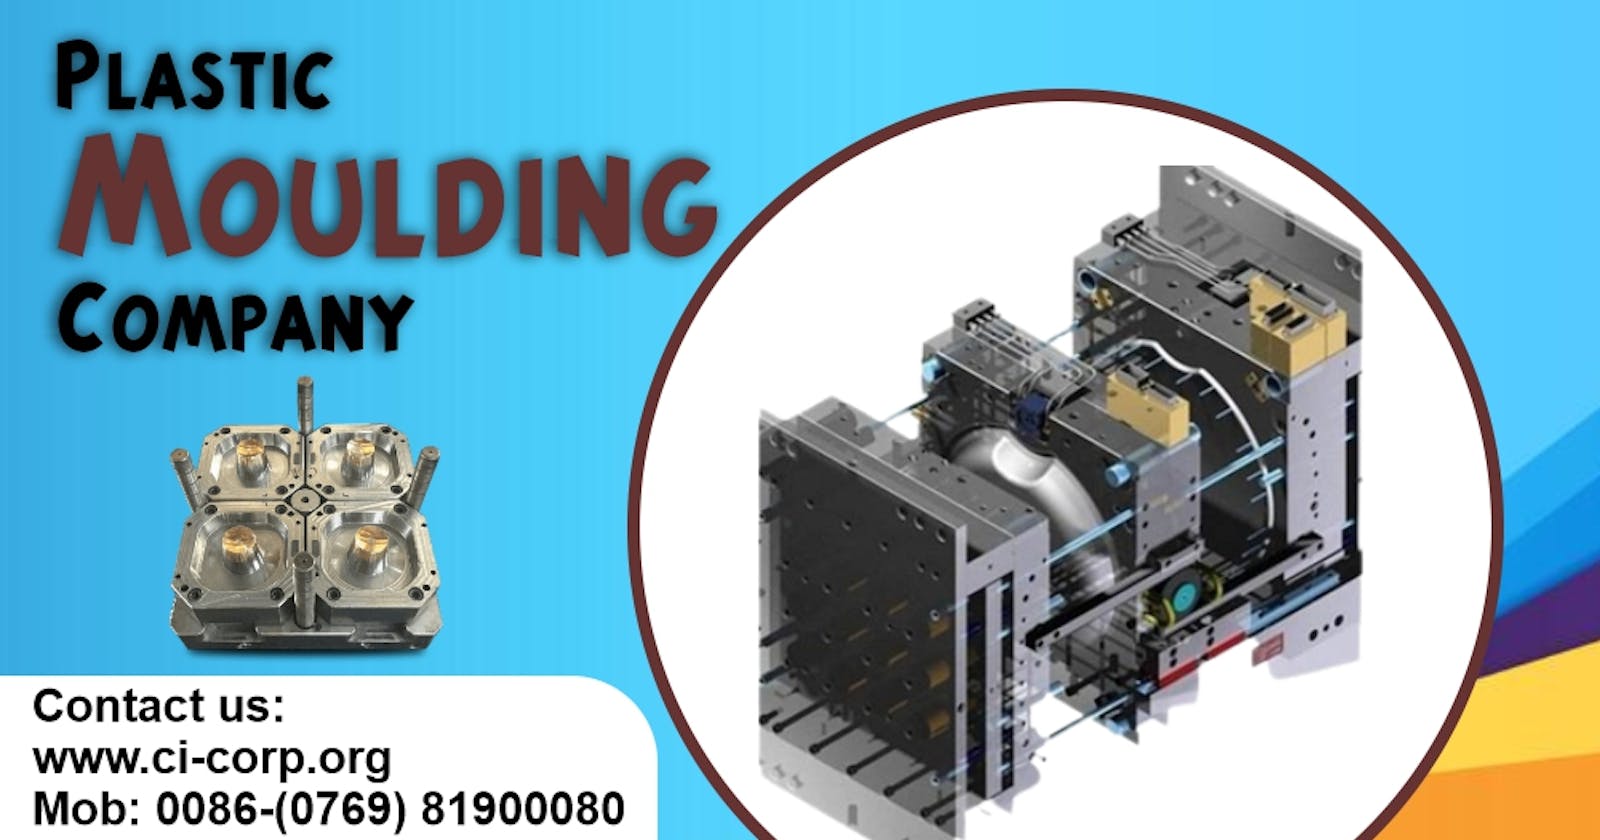 Reasons why You Should this Plastic Moulding Company